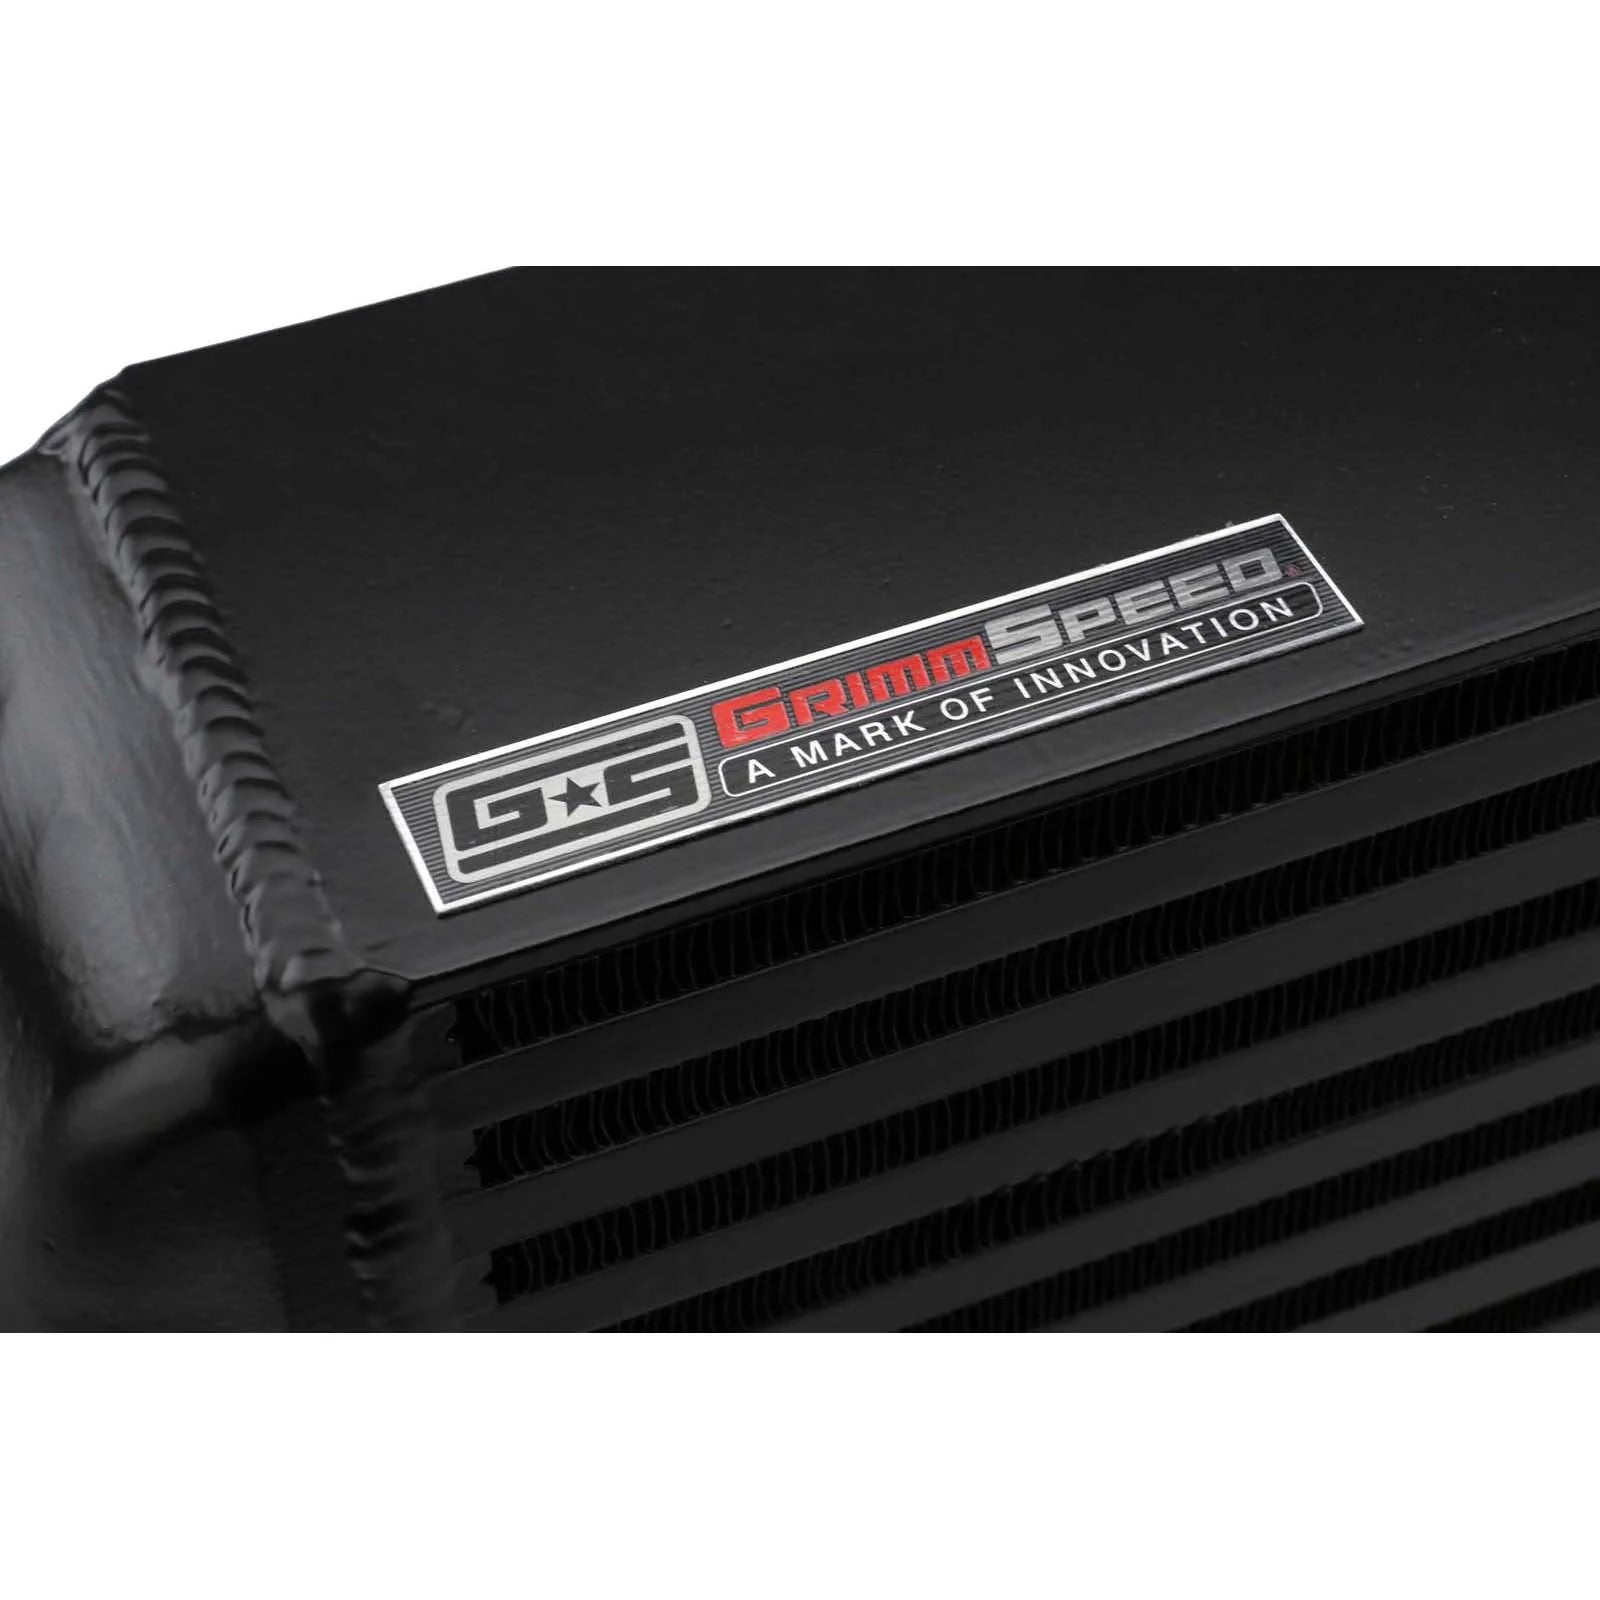 GrimmSpeed Front Mount Intercooler Kit - Black Core with Red Piping - 2008-14 Subaru WRX